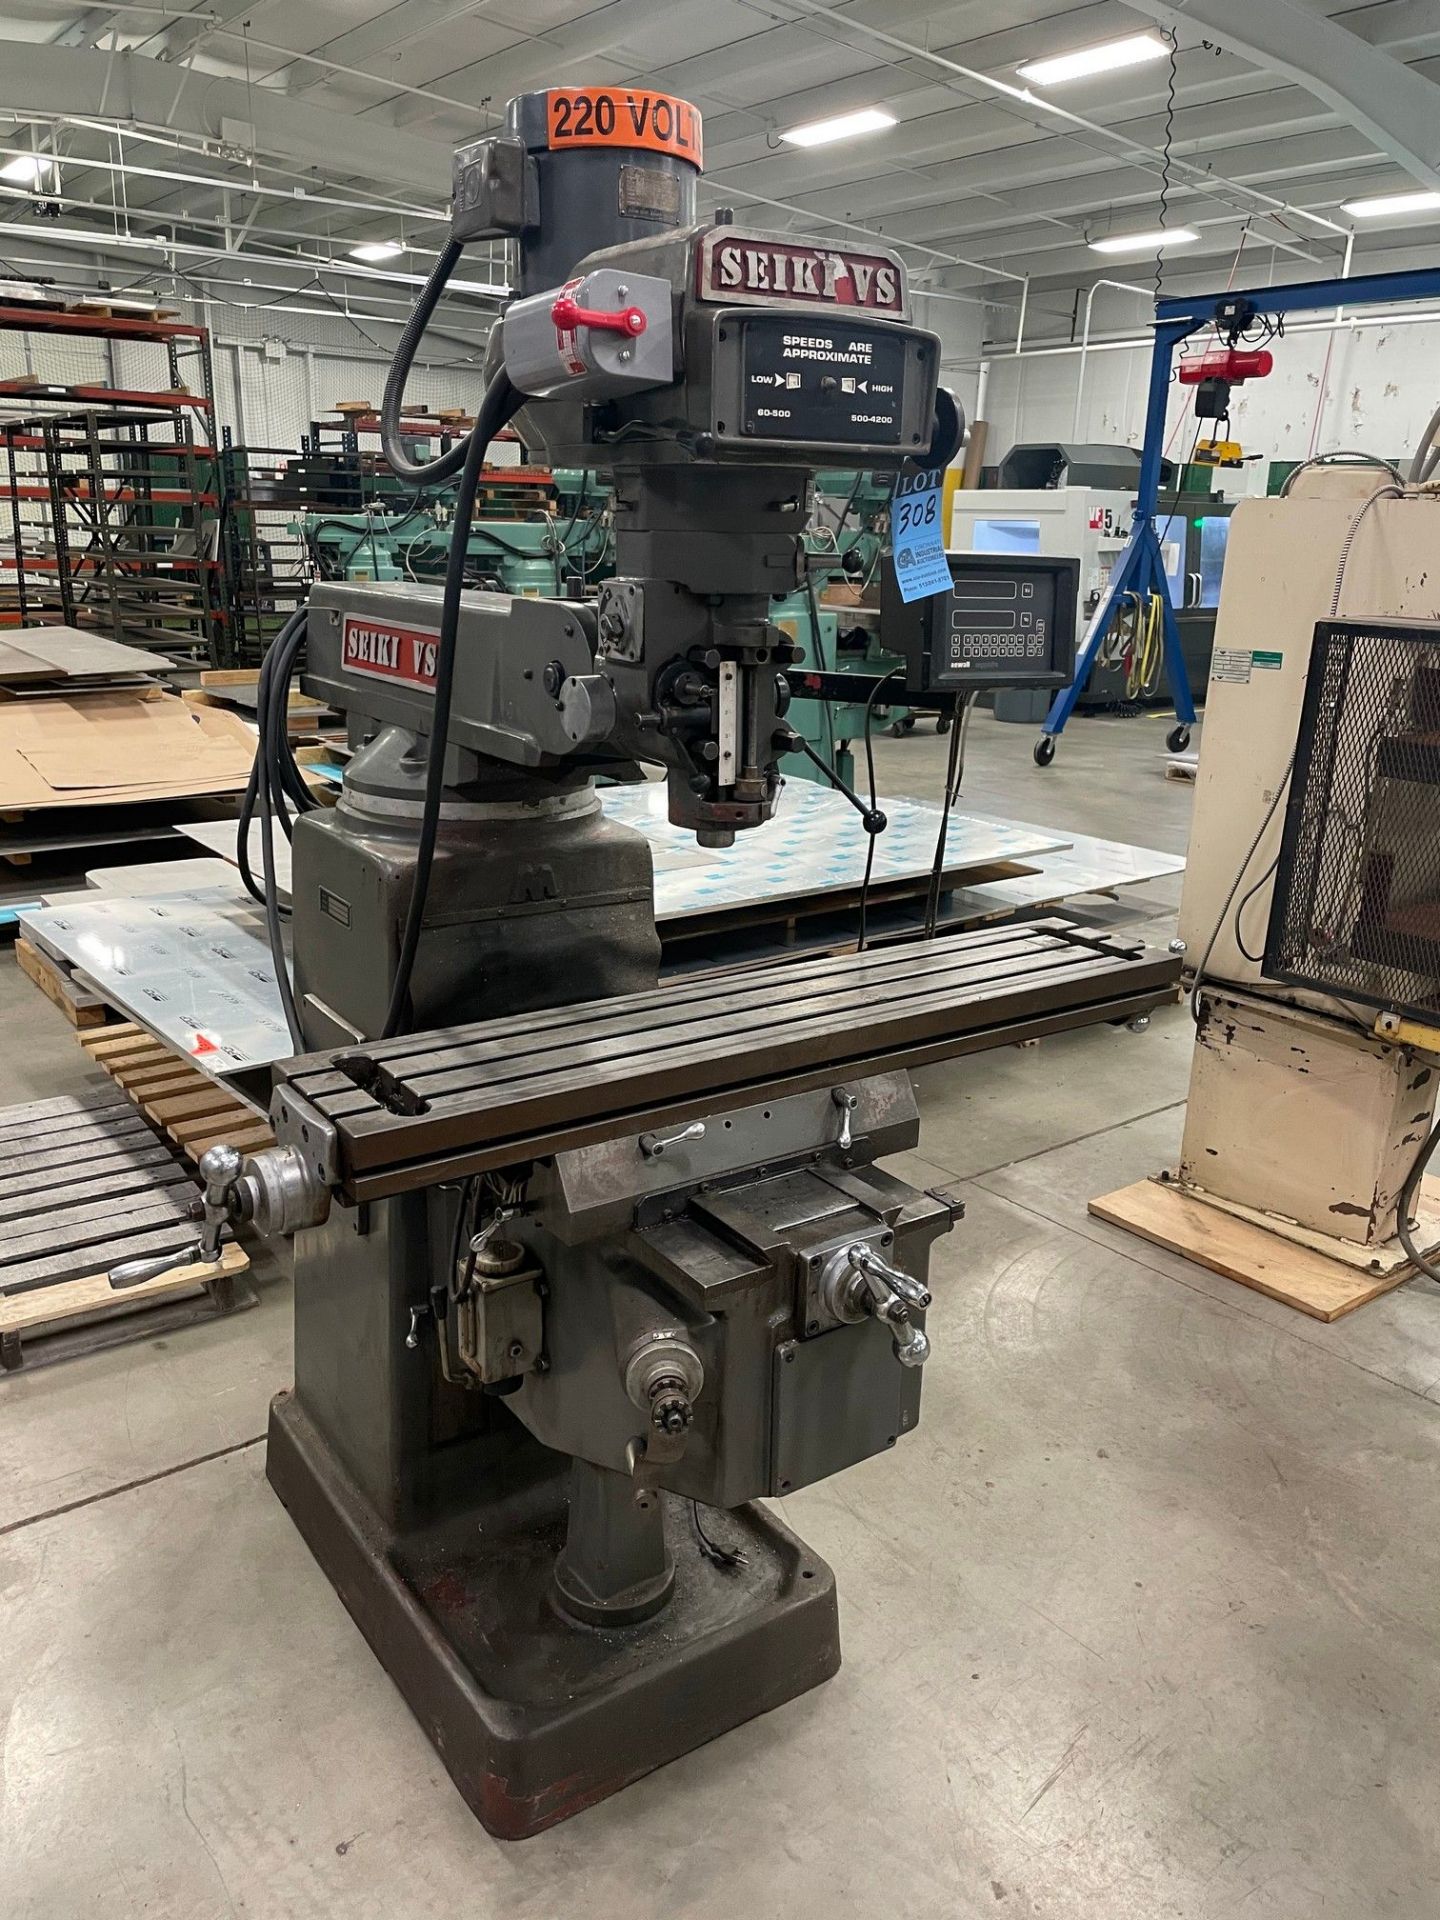 3 HP SEIKI MODEL 3VH VERTICAL MILLING MACHINE; S/N 8328, 10" X 50" TABLE, NEWALL DRO - Image 2 of 7